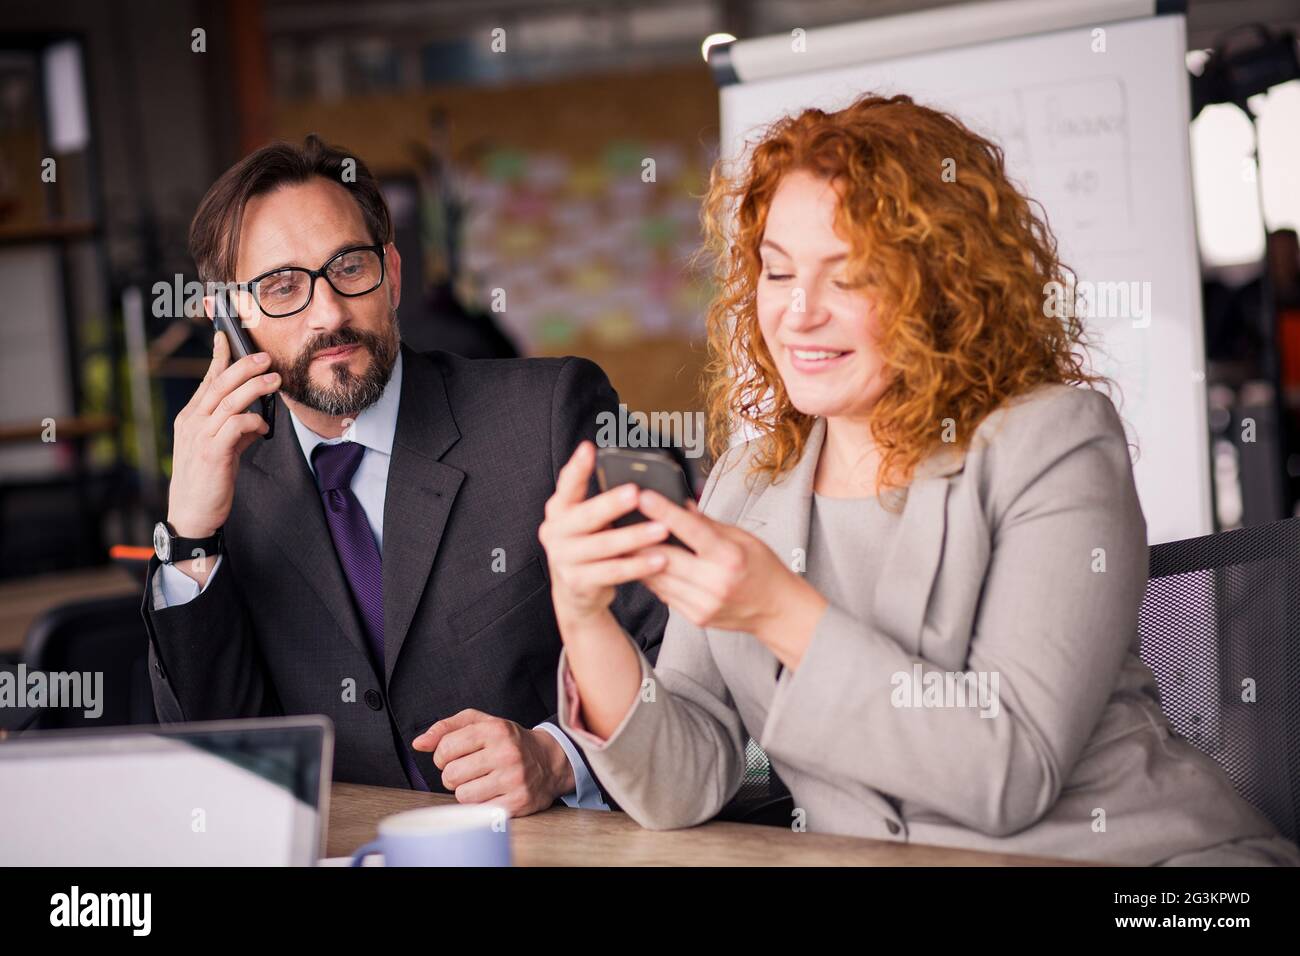 Businessman and businesswoman at working space communicating on phone. Stock Photo